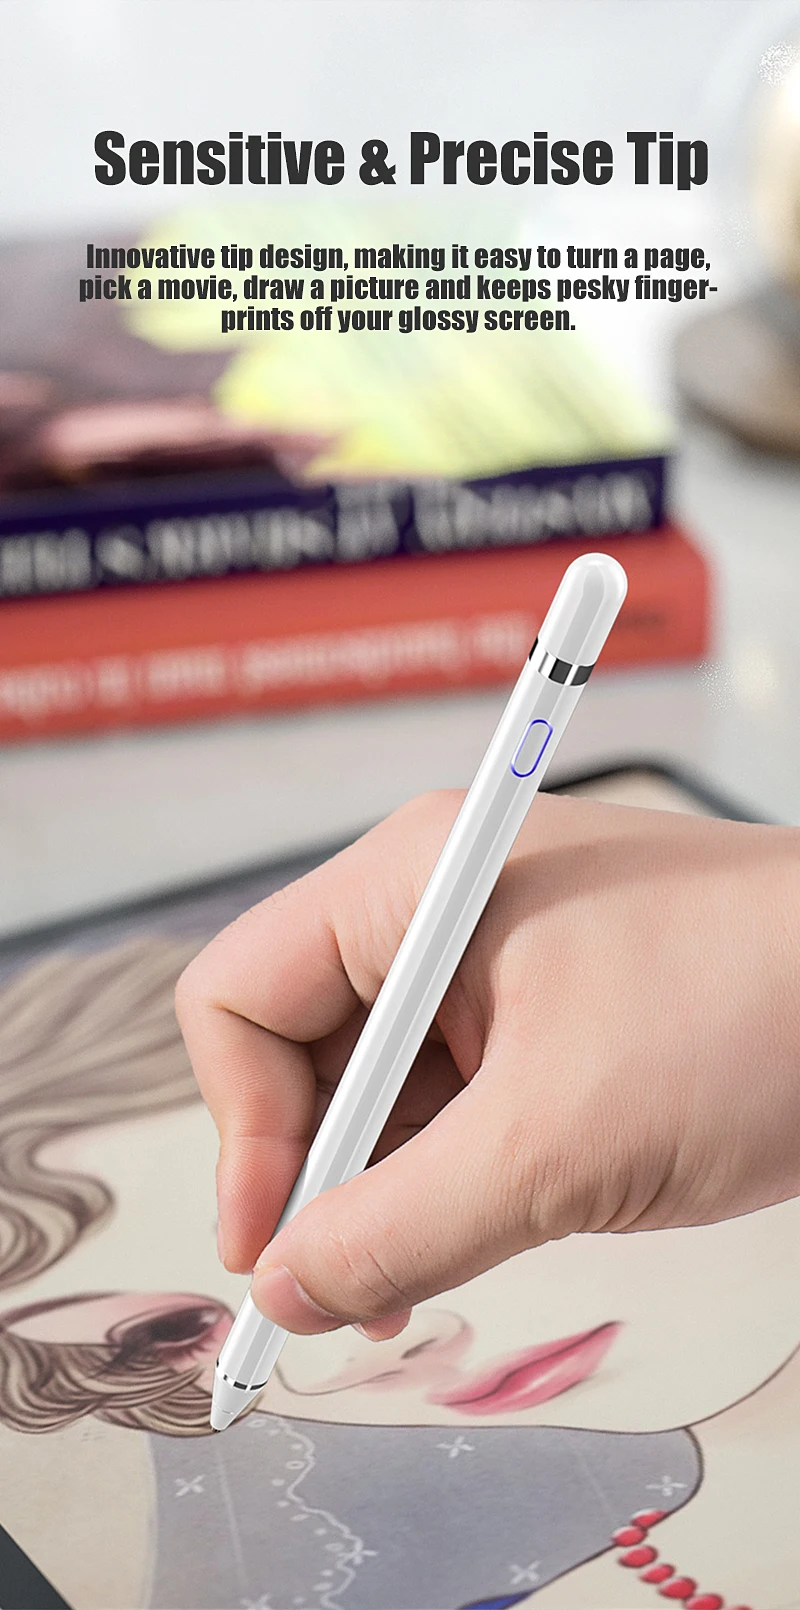 Active Stylus Pen Capacitive Touch Screen Pencil For Samsung Xiaomi HUAWEI iPad Tablet Phones iOS Android Pencil For Drawing